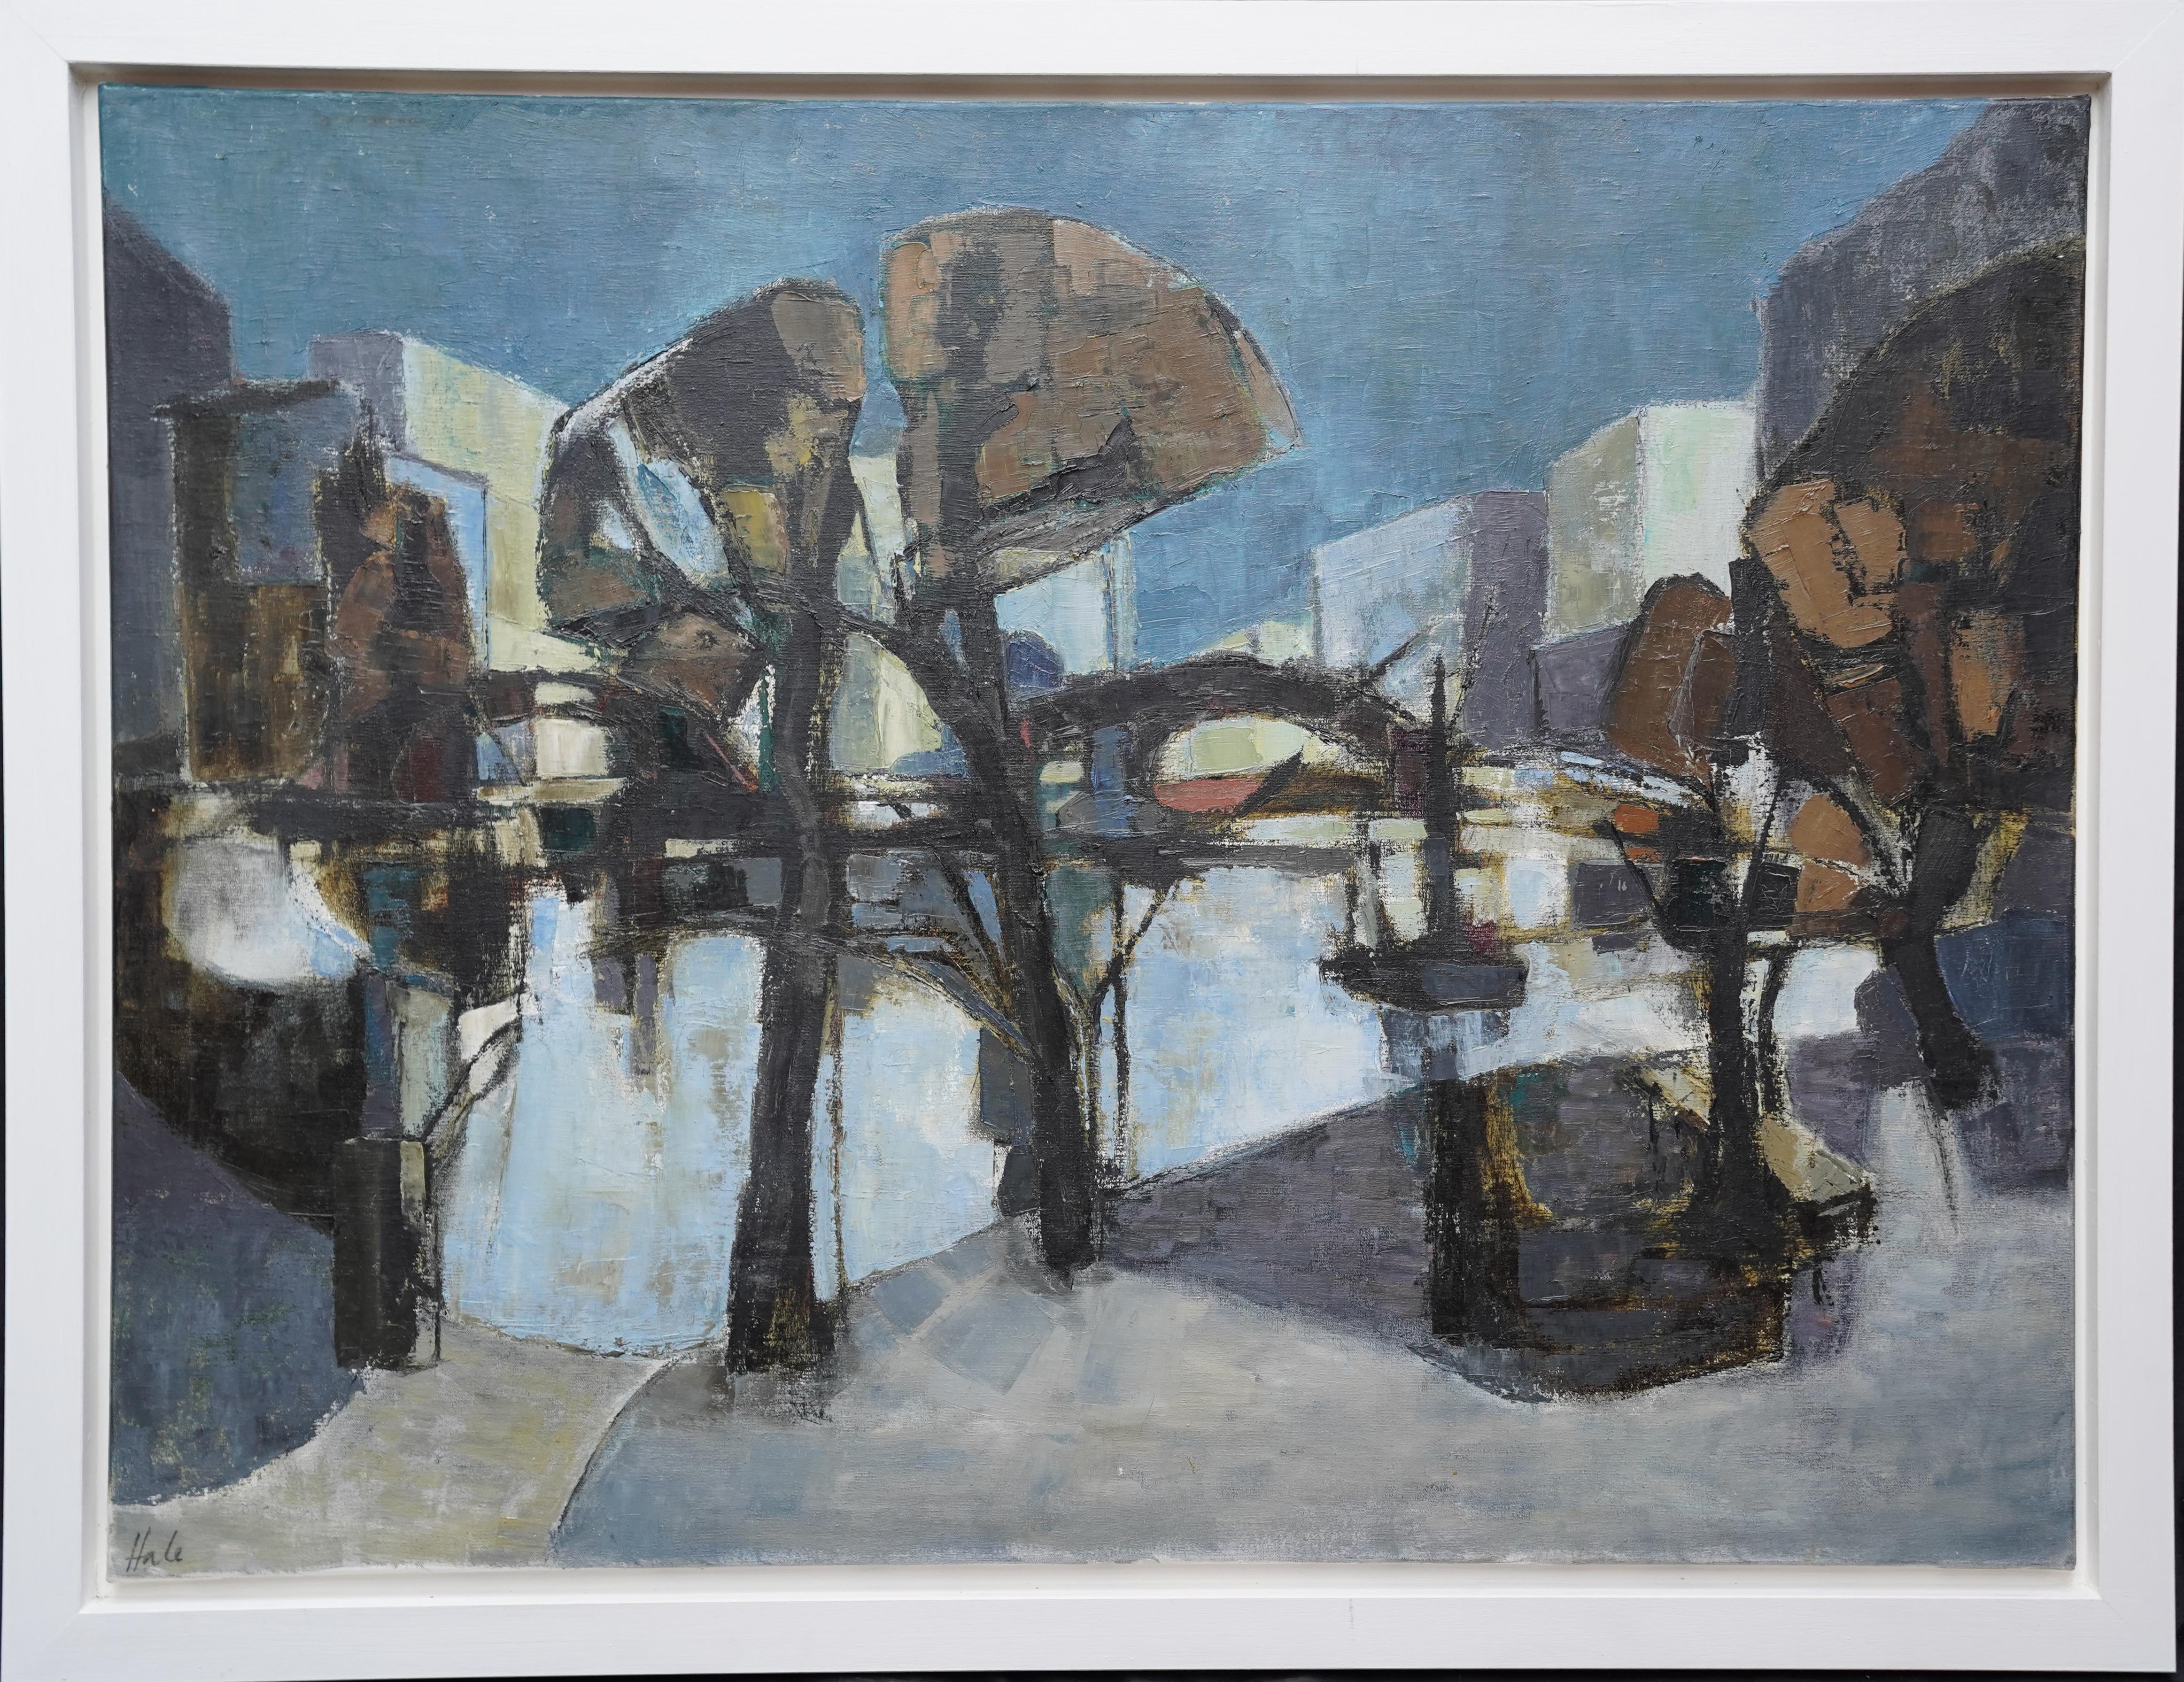 Helen Hale Landscape Painting - Waterfront - British 1960's art Abstract Expressionist exhibited oil painting